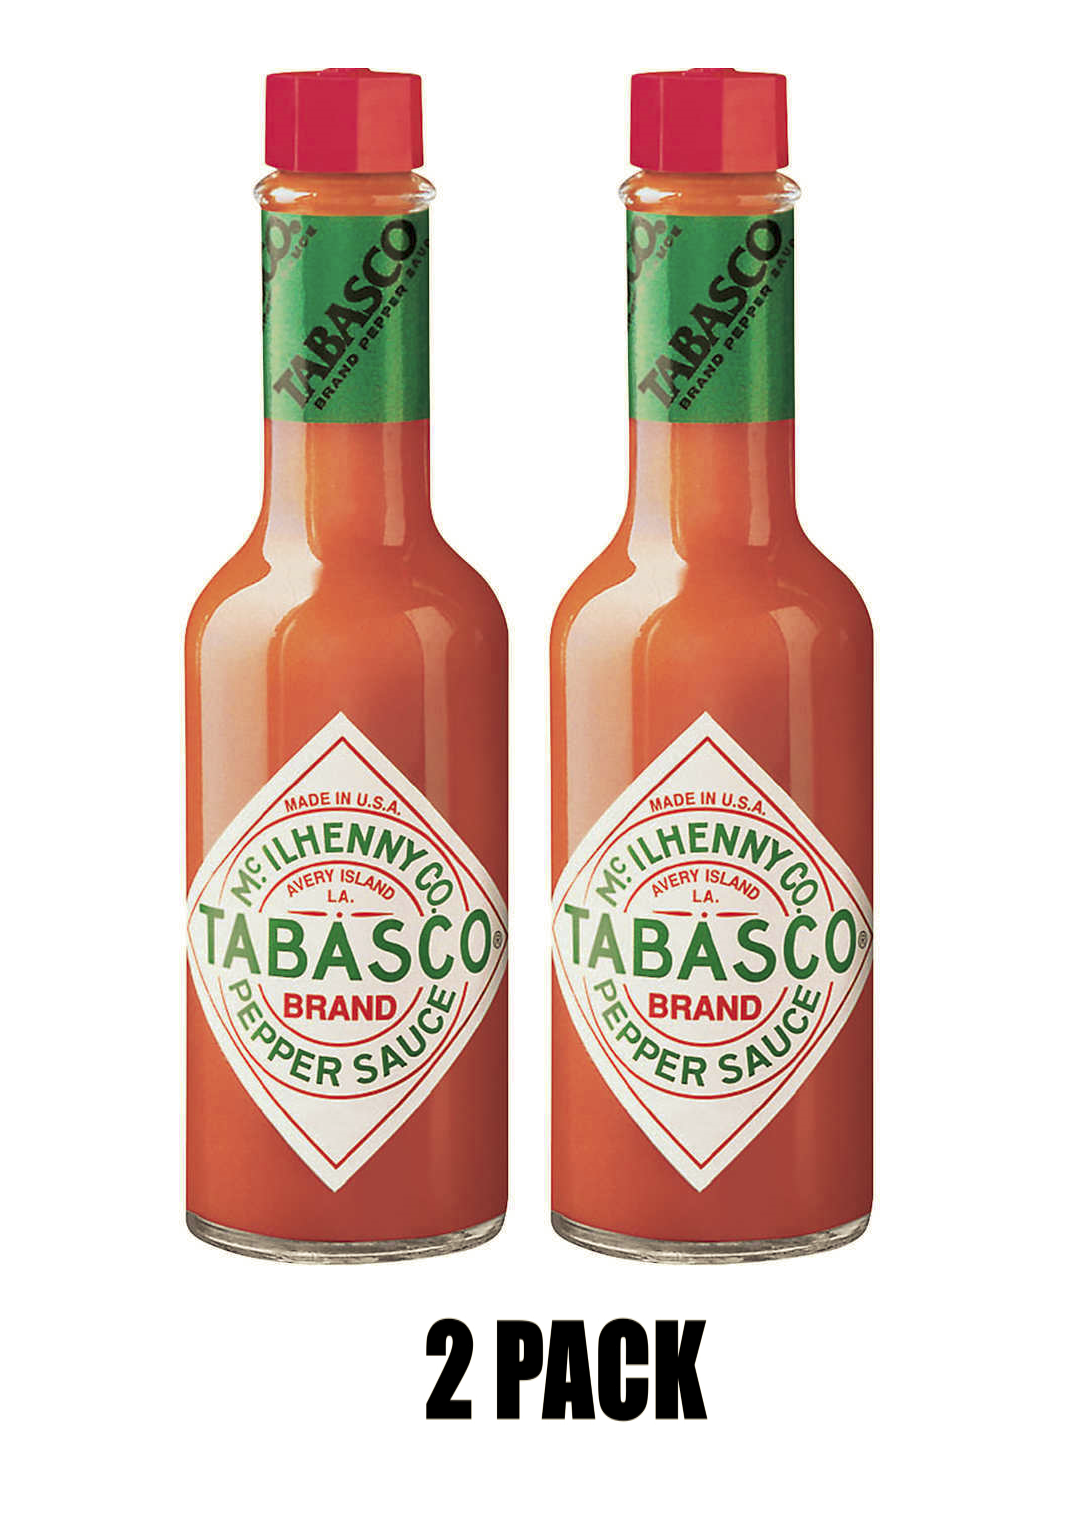 2 - Tabasco Pepper Sauce Large 12 ounce Bottle 2 Pack Original Flavor Hot Spicy - $26.23